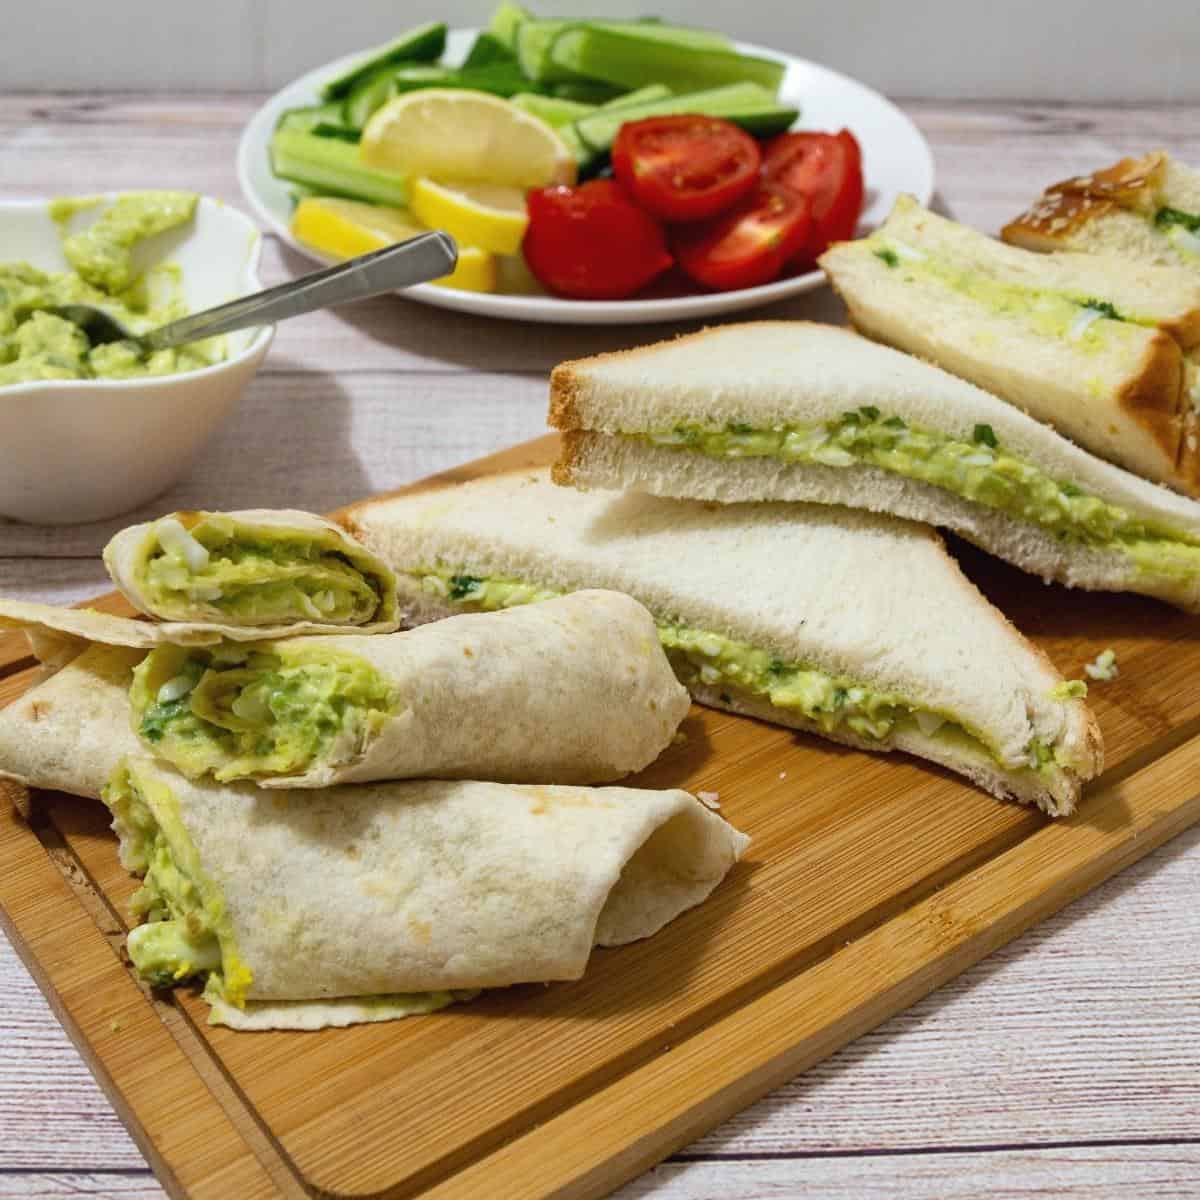 A sandwich wrap with avocado and egg.